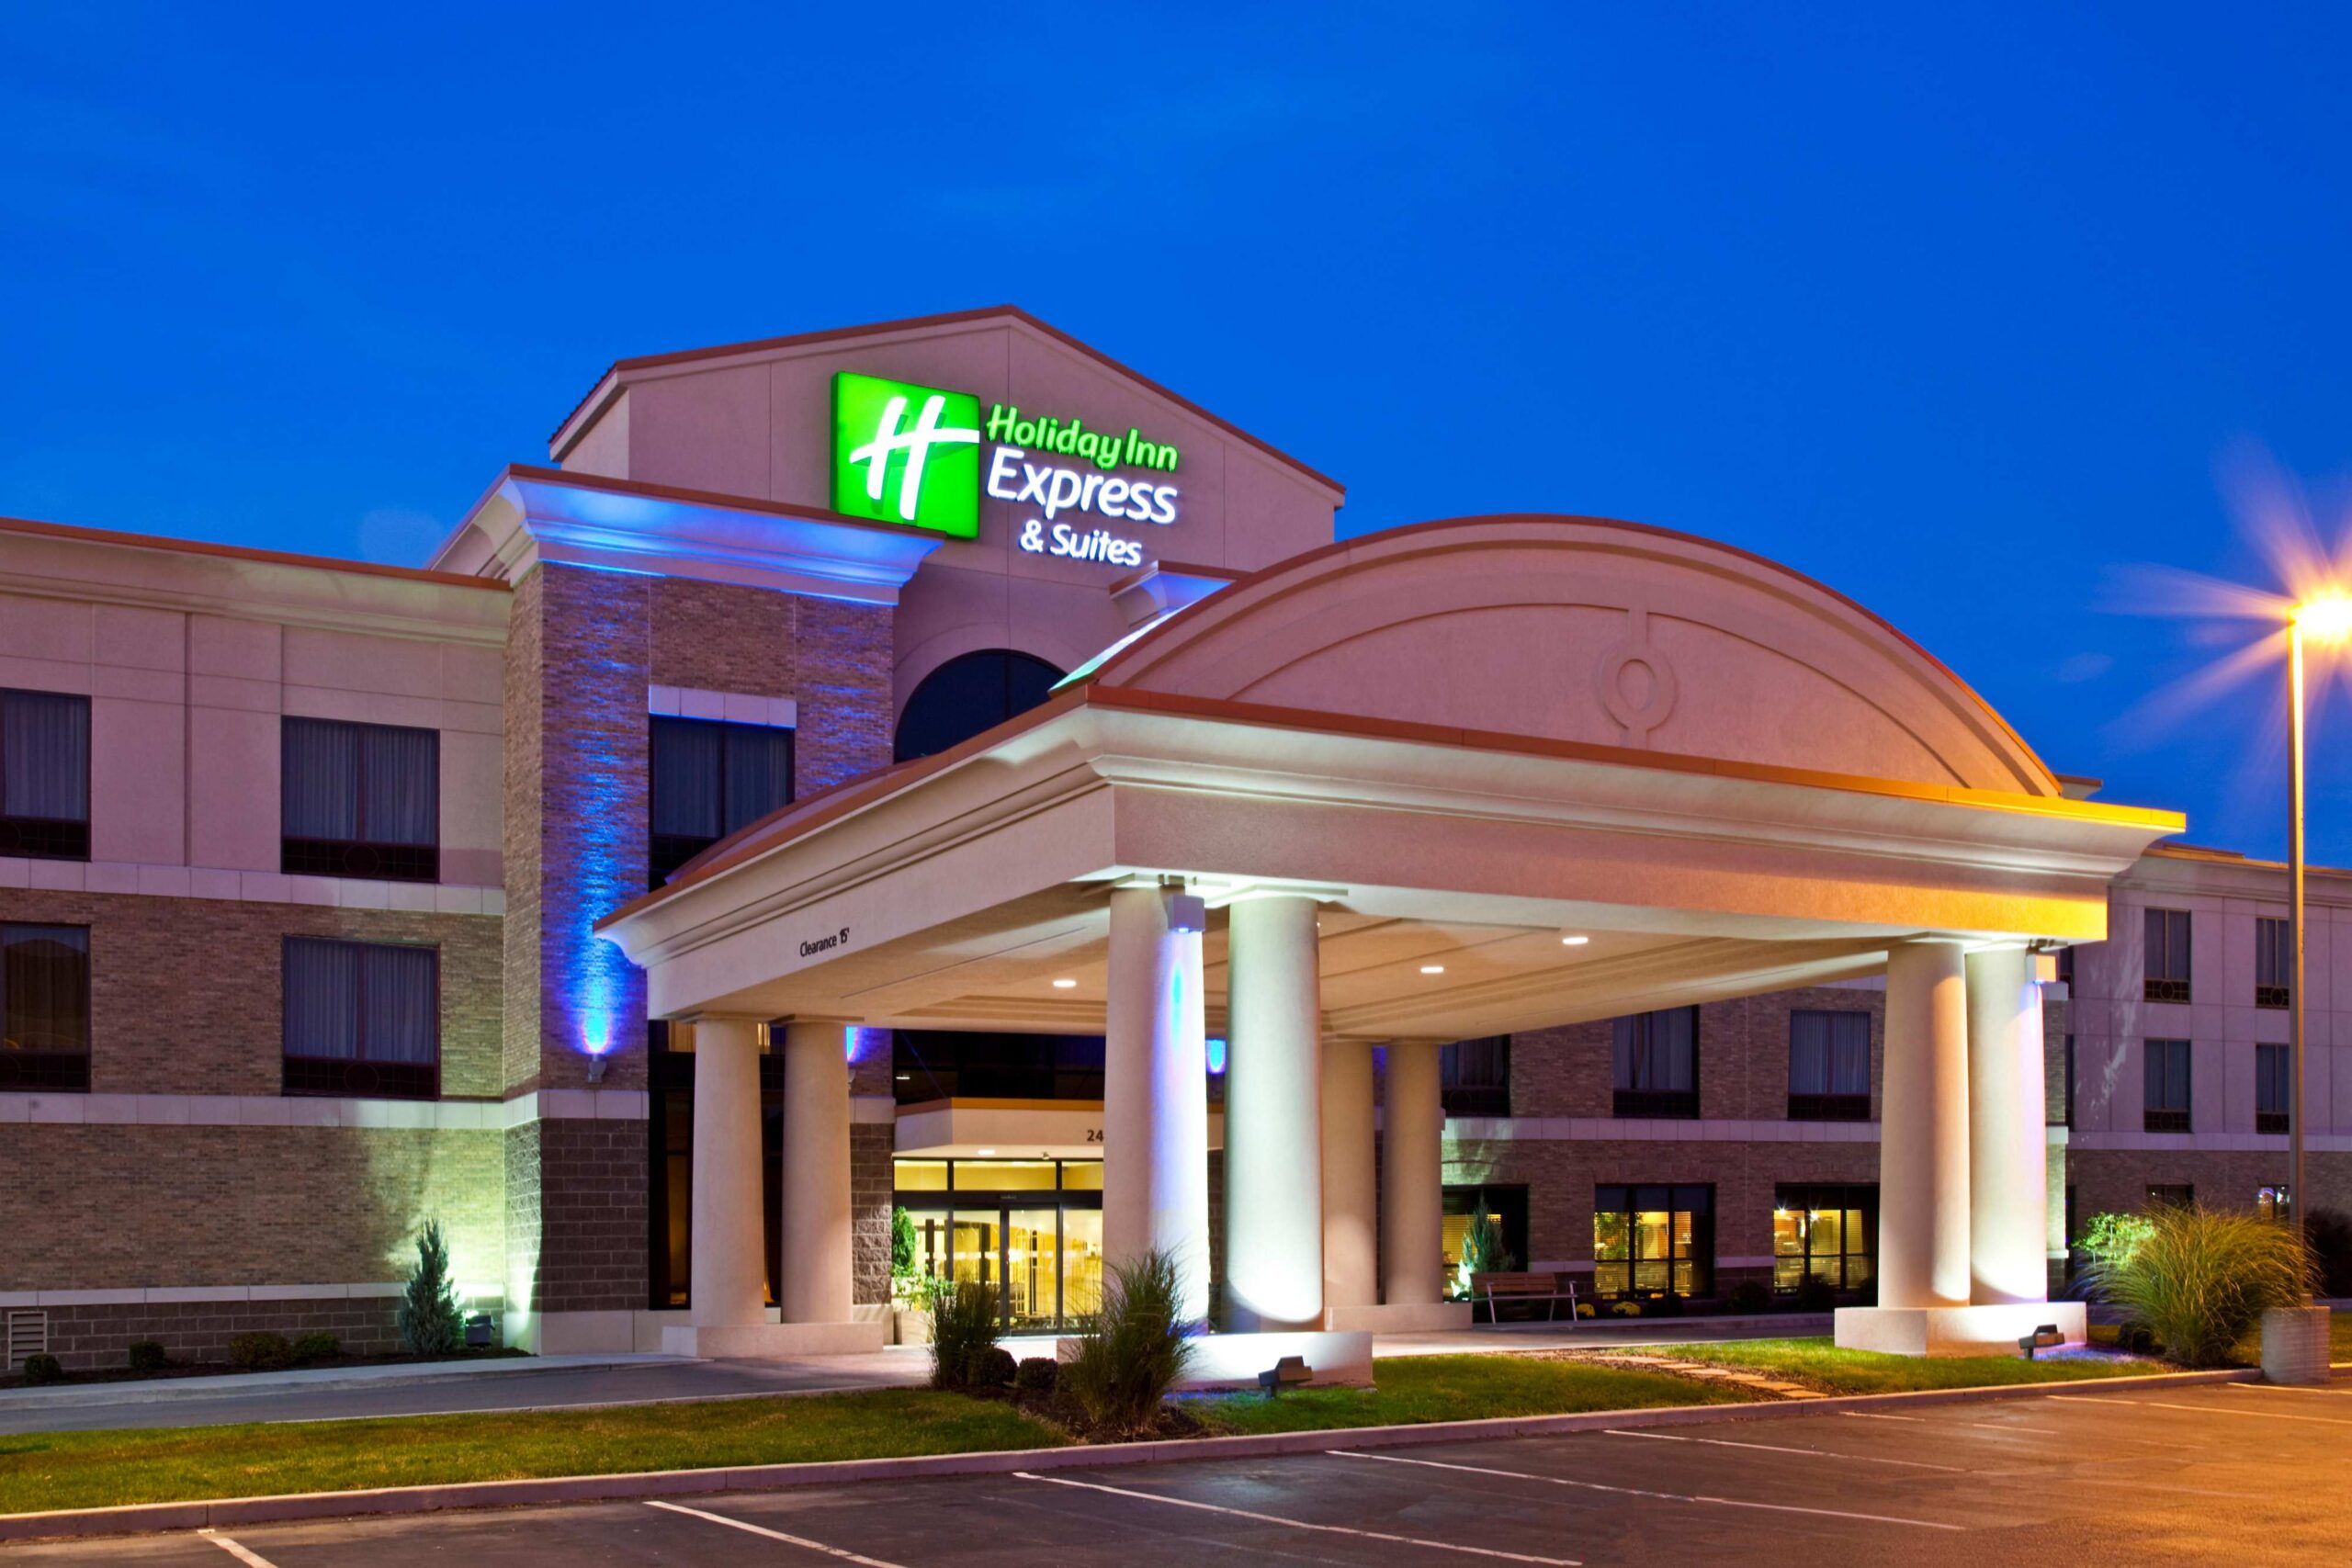 Exterior Entrance of Holiday Inn Express & Suites